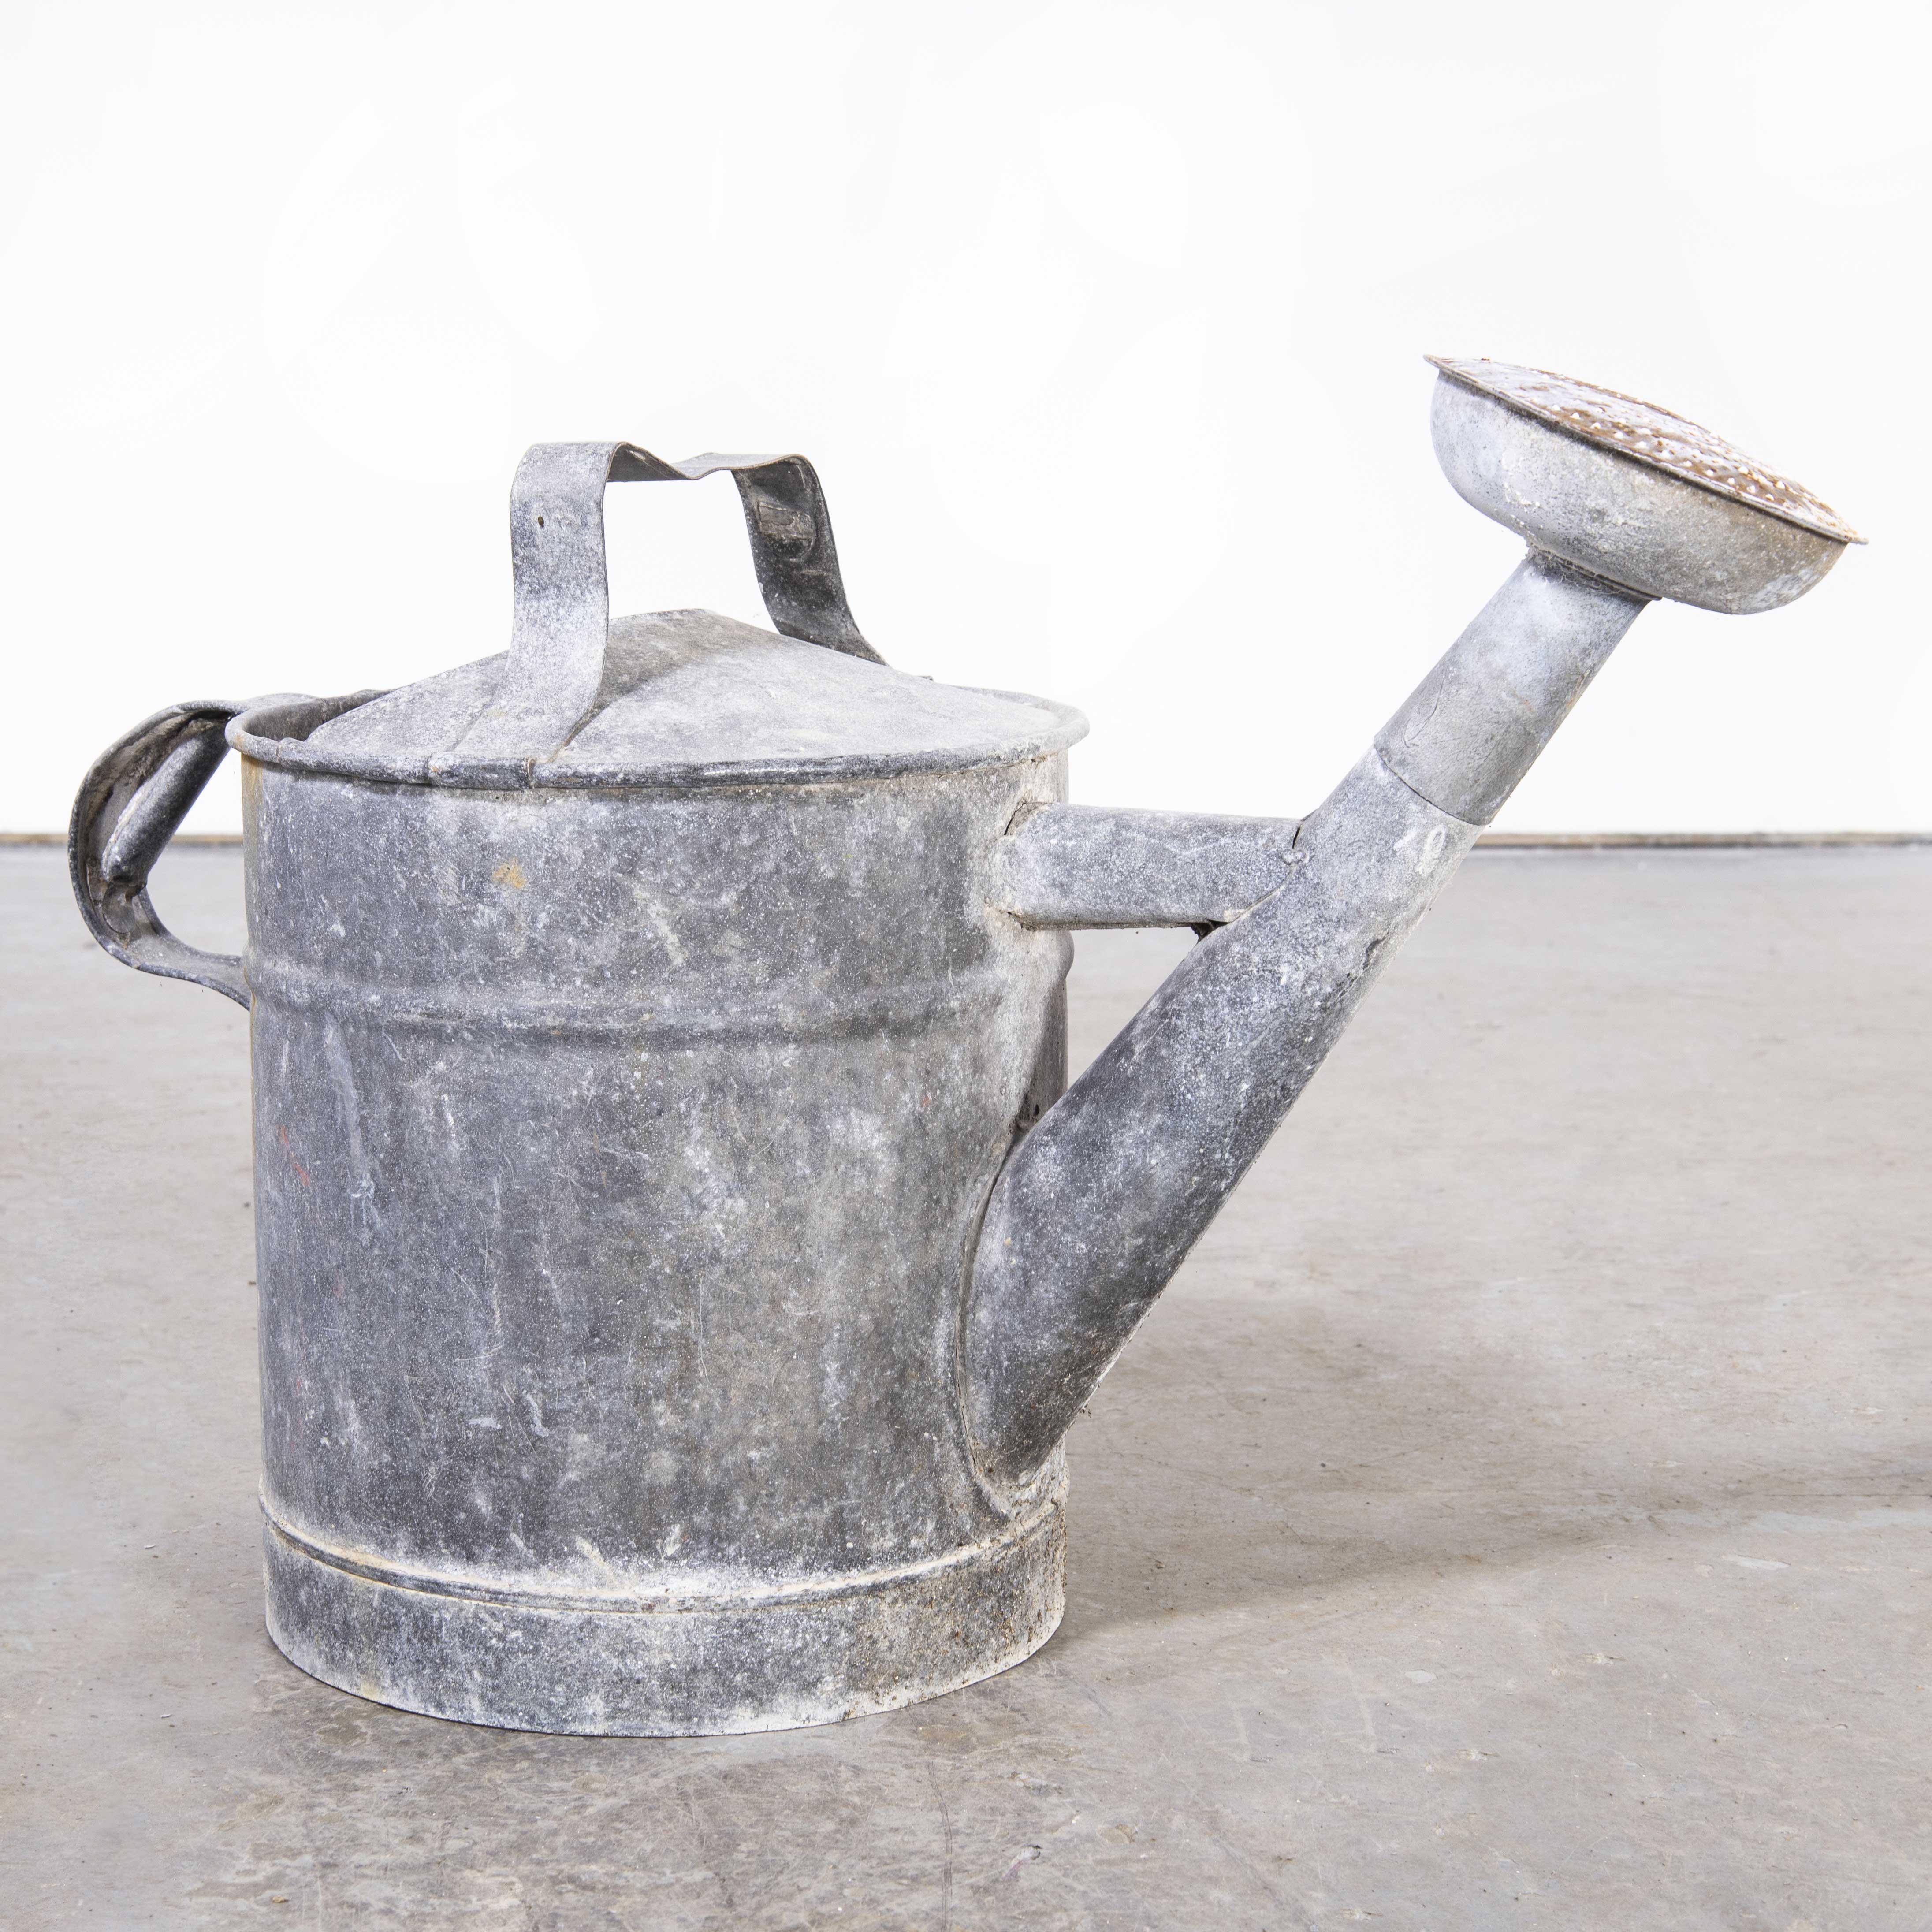 1950’s Original French Galvanised watering can
1950’s Good Size Galvanised Watering Can. Tall well proportioned watering can complete with nozzle. We have a number of original watering cans all in good condition, they all hold water and are sold